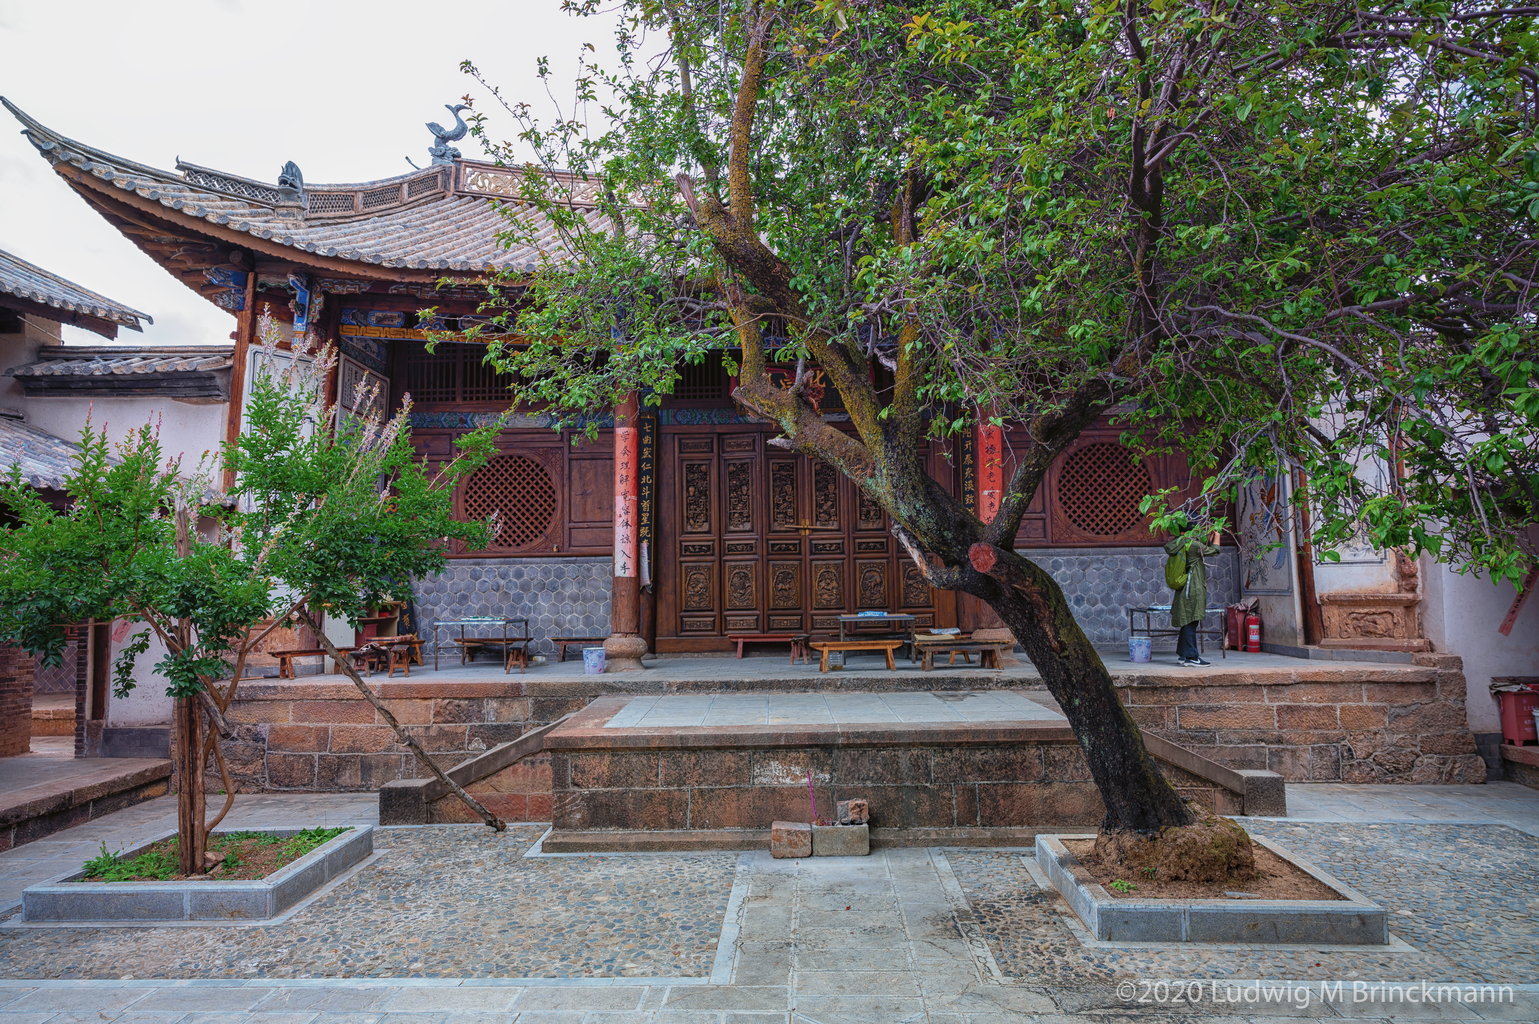 Picture: Reconstructed Wenchang temple in the Shaxi basin.